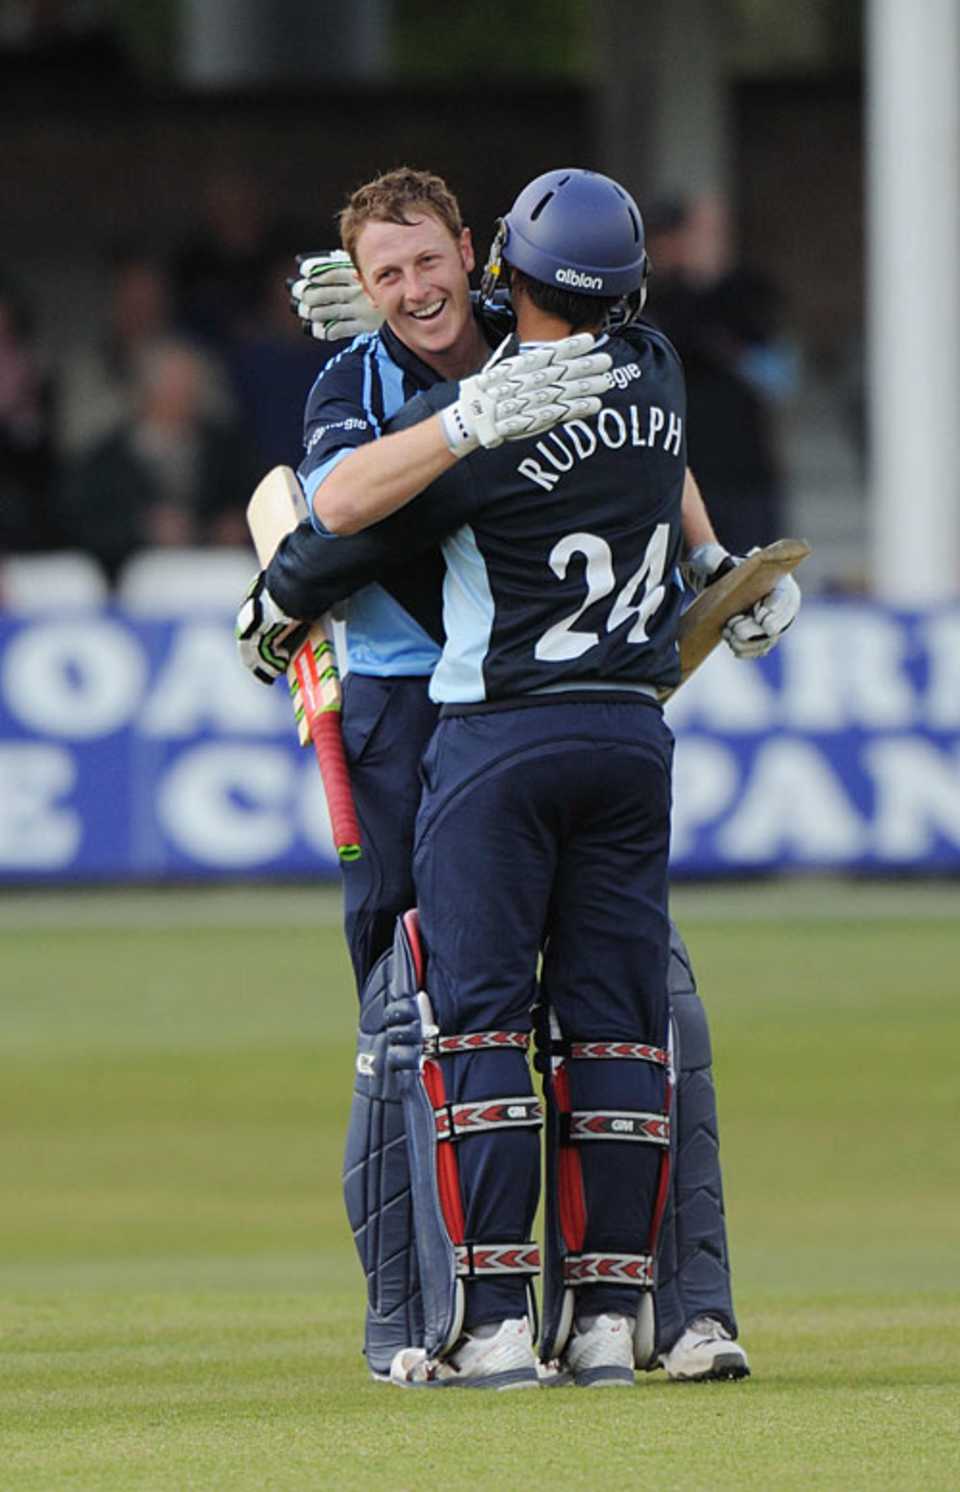 Andrew Gale and Jacques Rudolph shared an unbeaten opening stand of 233 to win the game, Essex v Yorkshire, Clydesdale Bank 40, Group B, Chelmsford, April 25, 2010